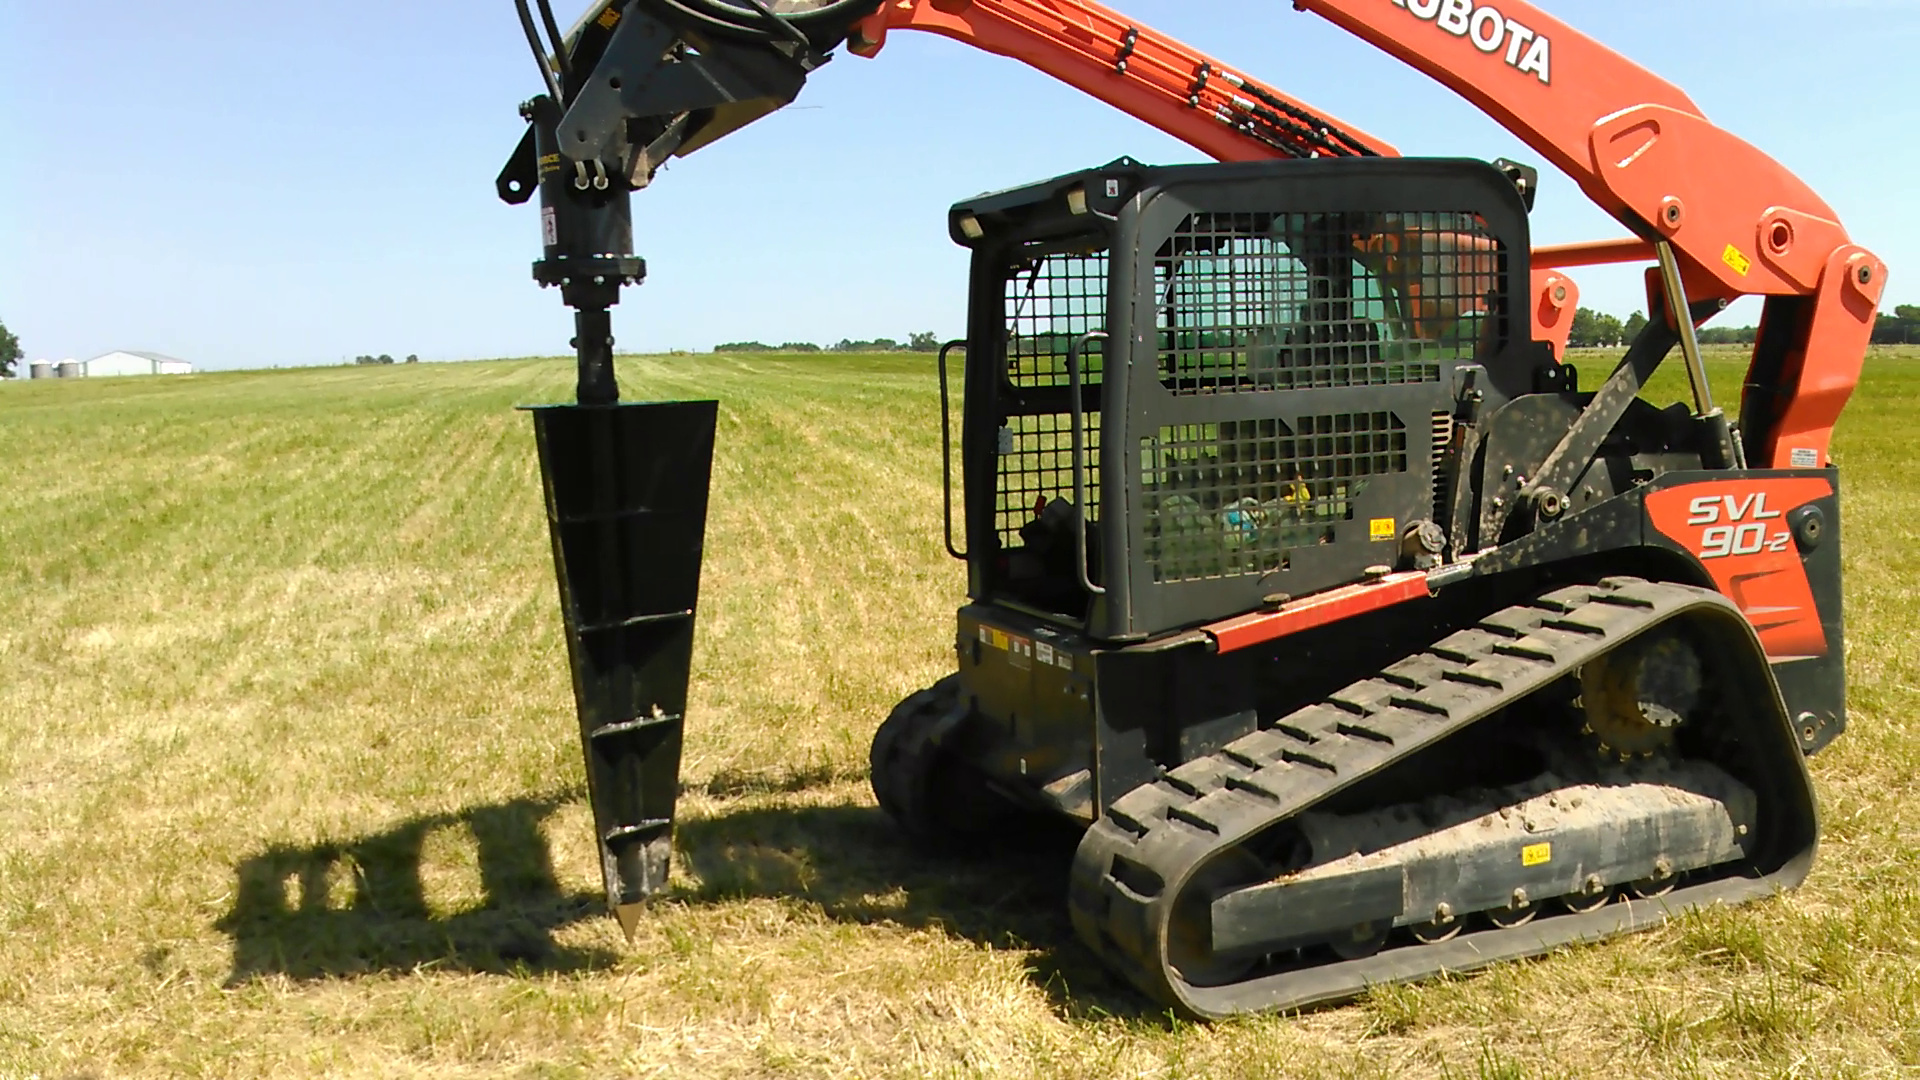 Custom Made WIRE WINDER Loader and Skid Steer Attachment - $1,600